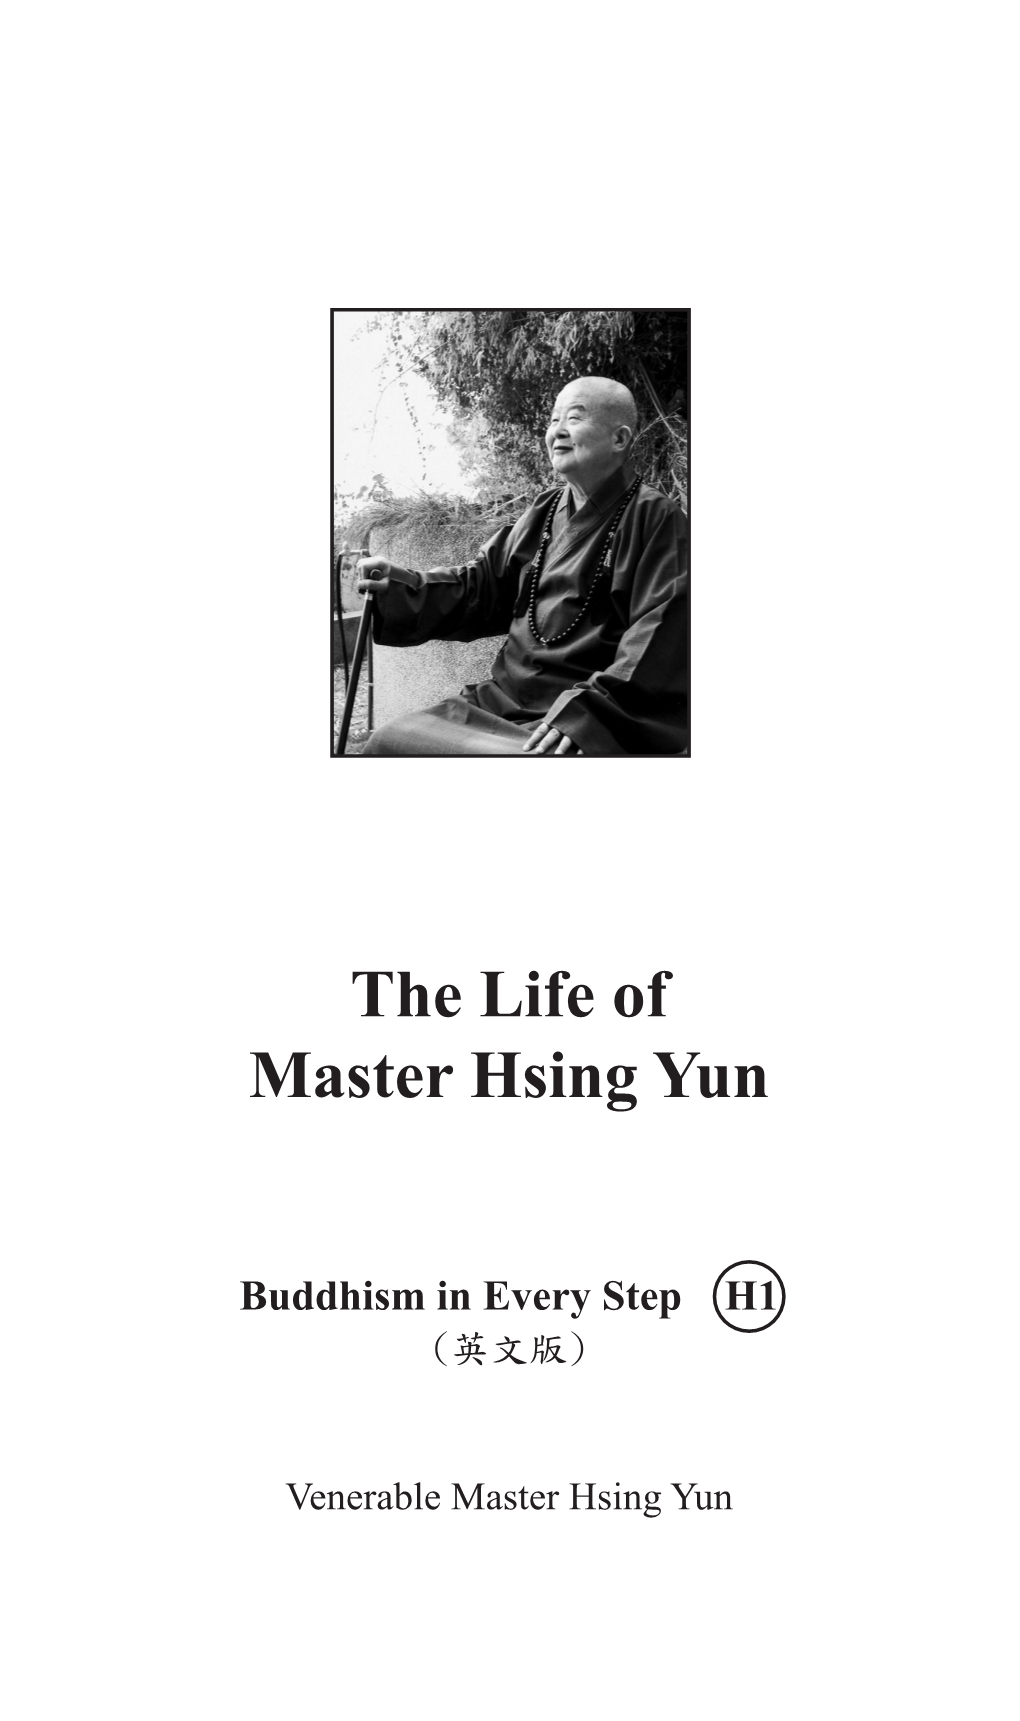 The Life of Master Hsing Yun